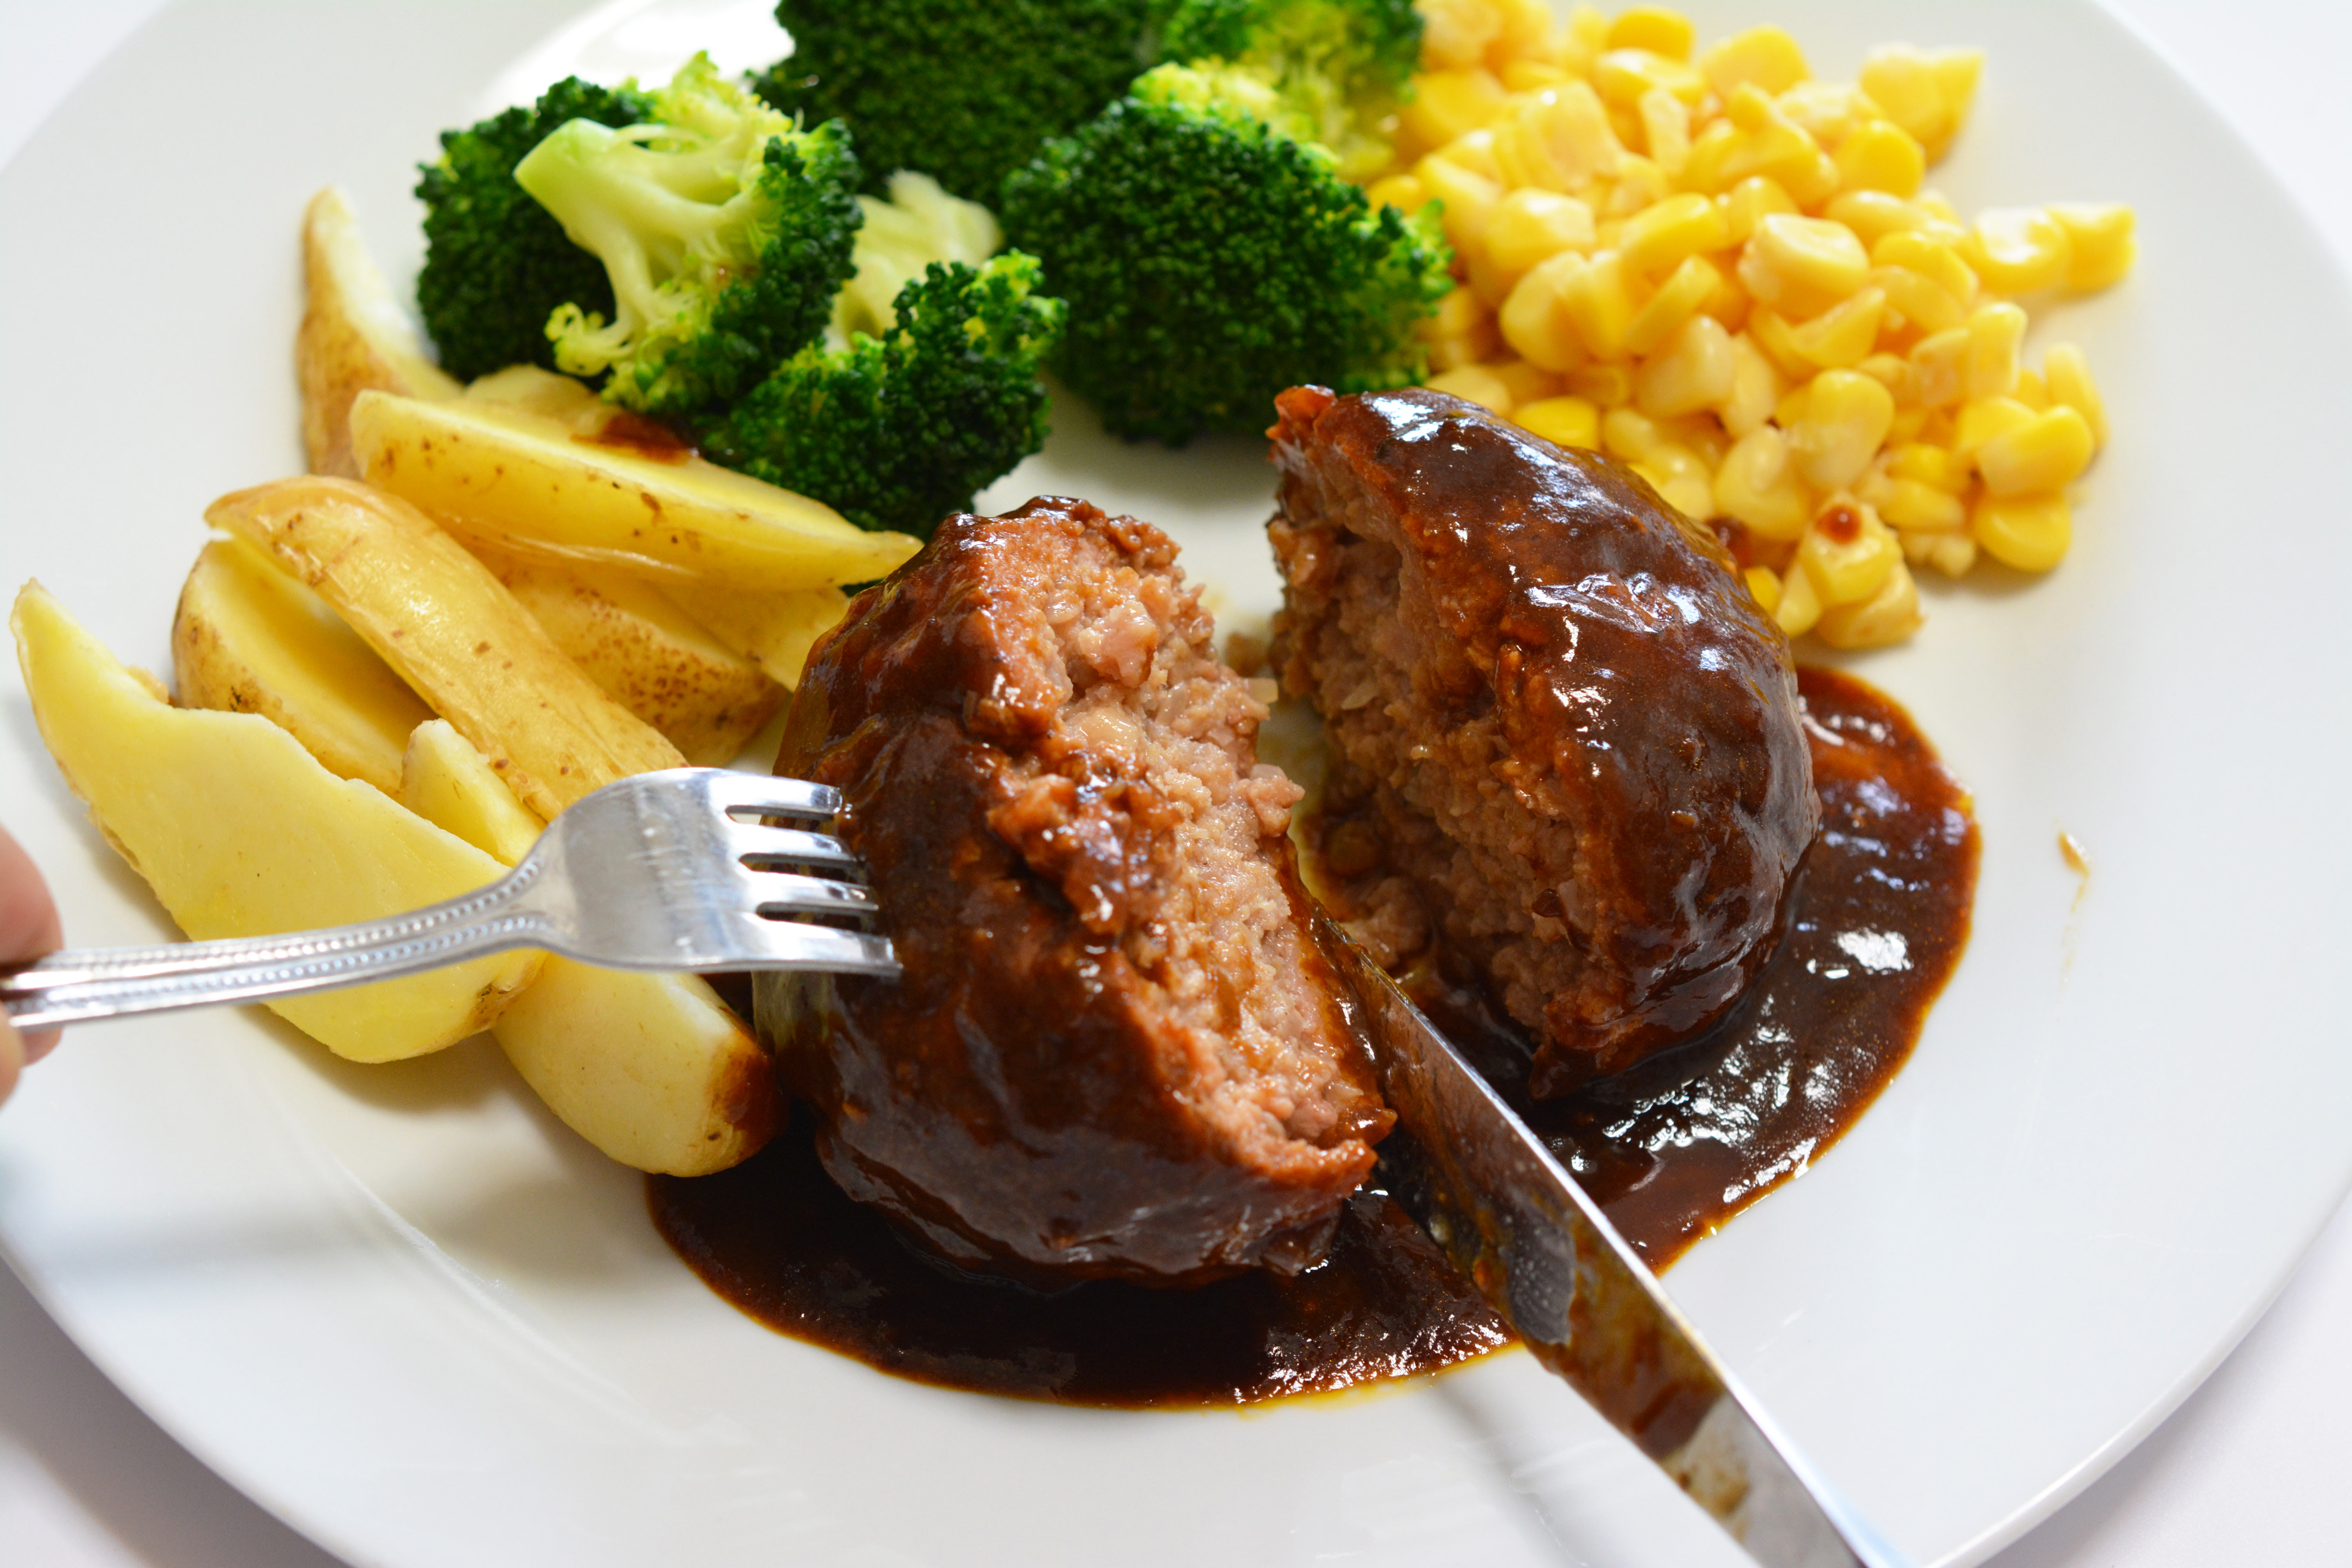 A hamburg steak on a plate with potatoes, broccoli and sweetcorn. A knife and fork are slicing the Hamburg steak in half. The steak is coated with a demi-glacé sauce.